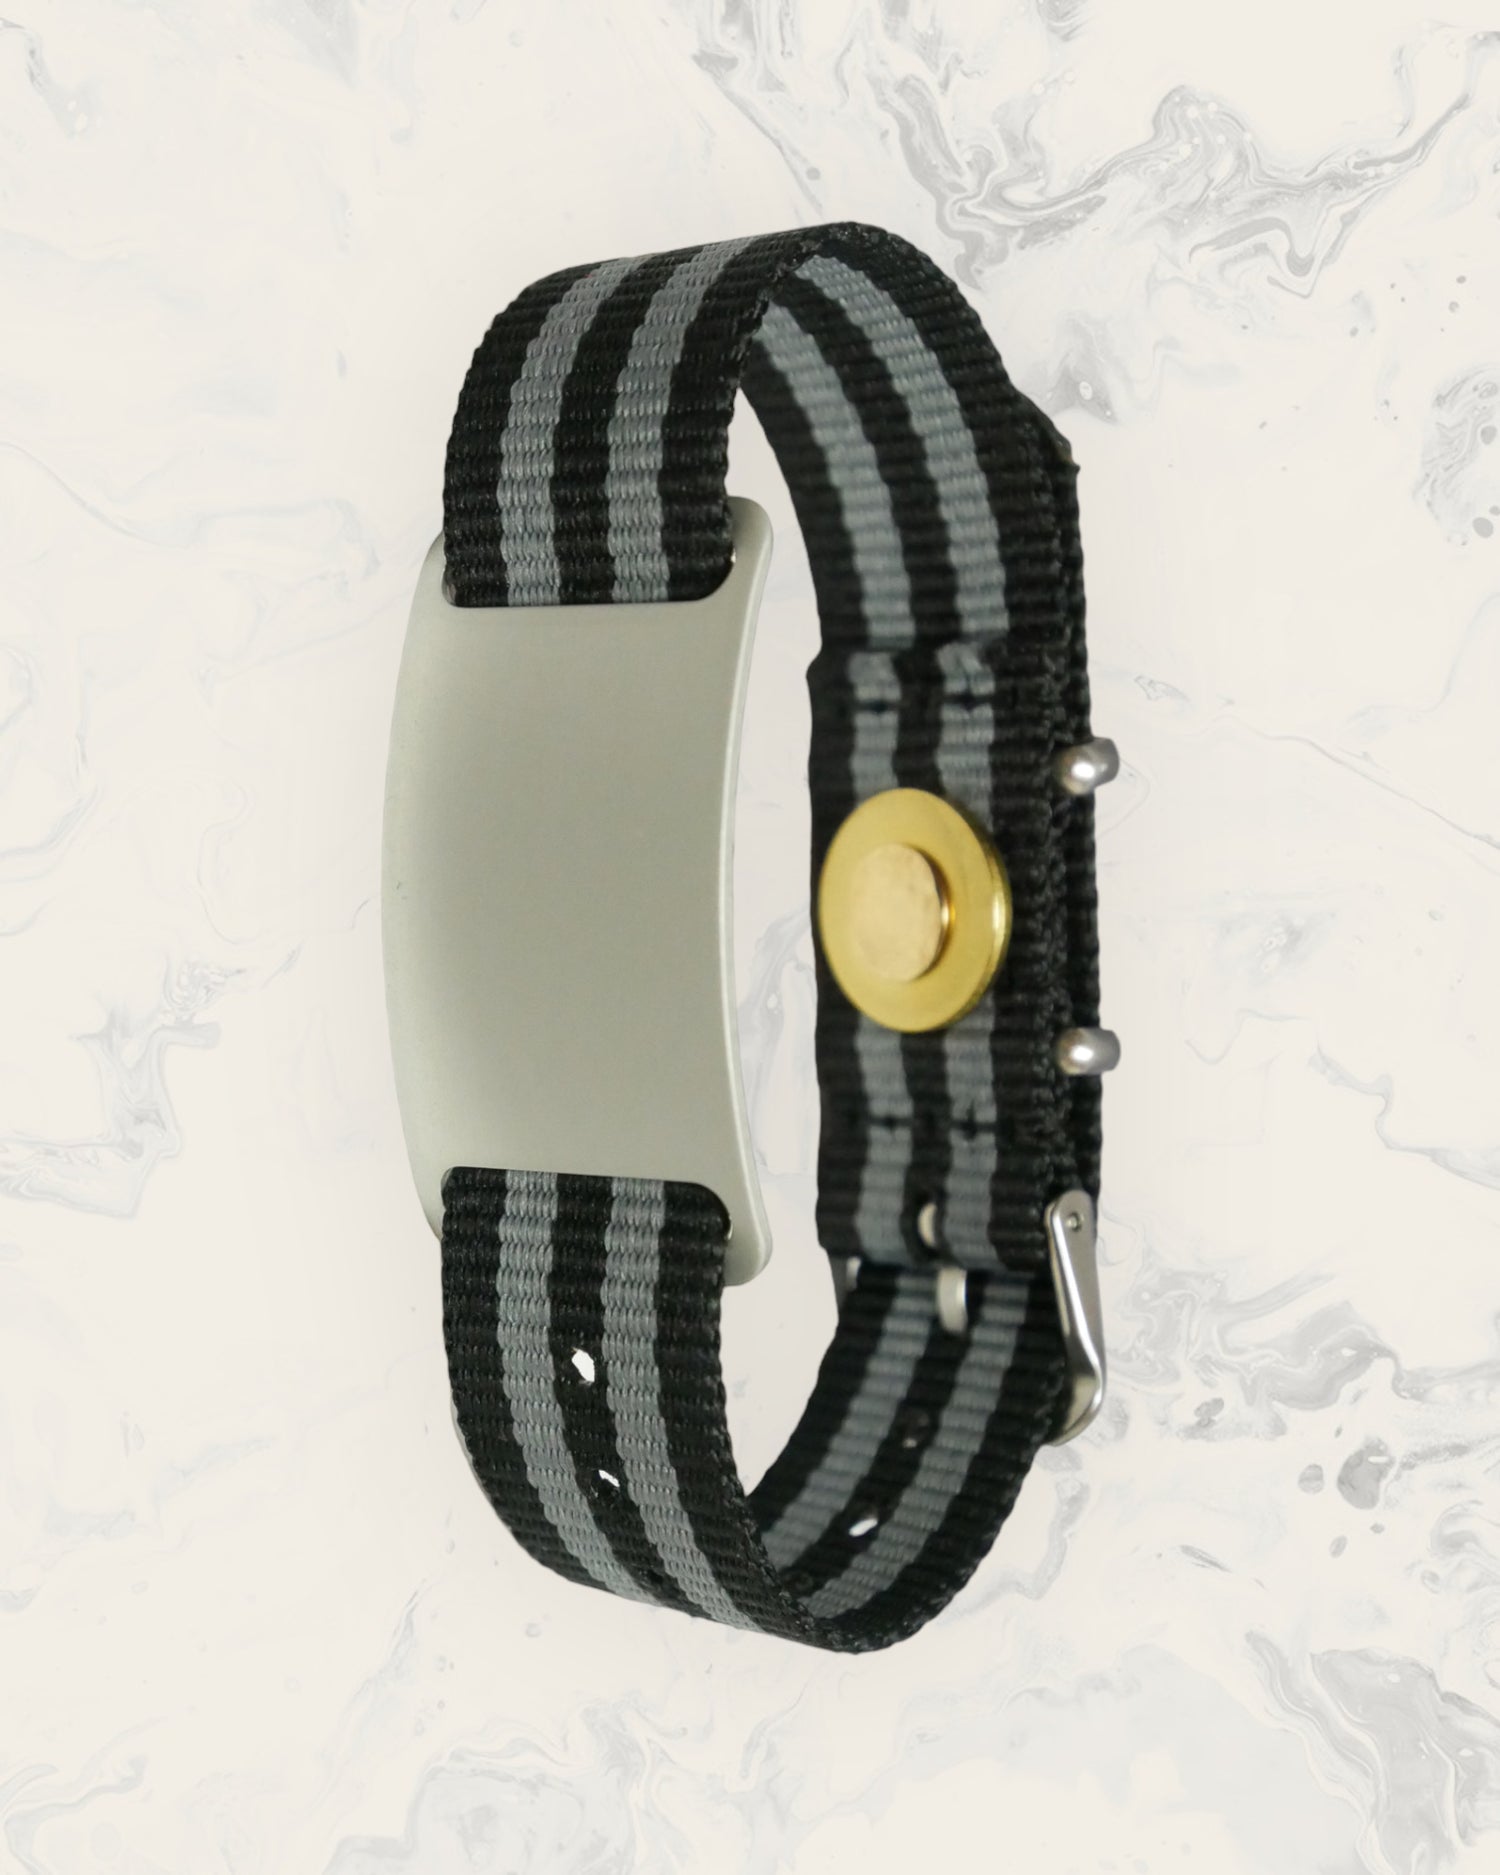 Natural Pain Relief and EMF Protection Bracelet Nylon Band Color Black and Gray Striped with a Silver Slider